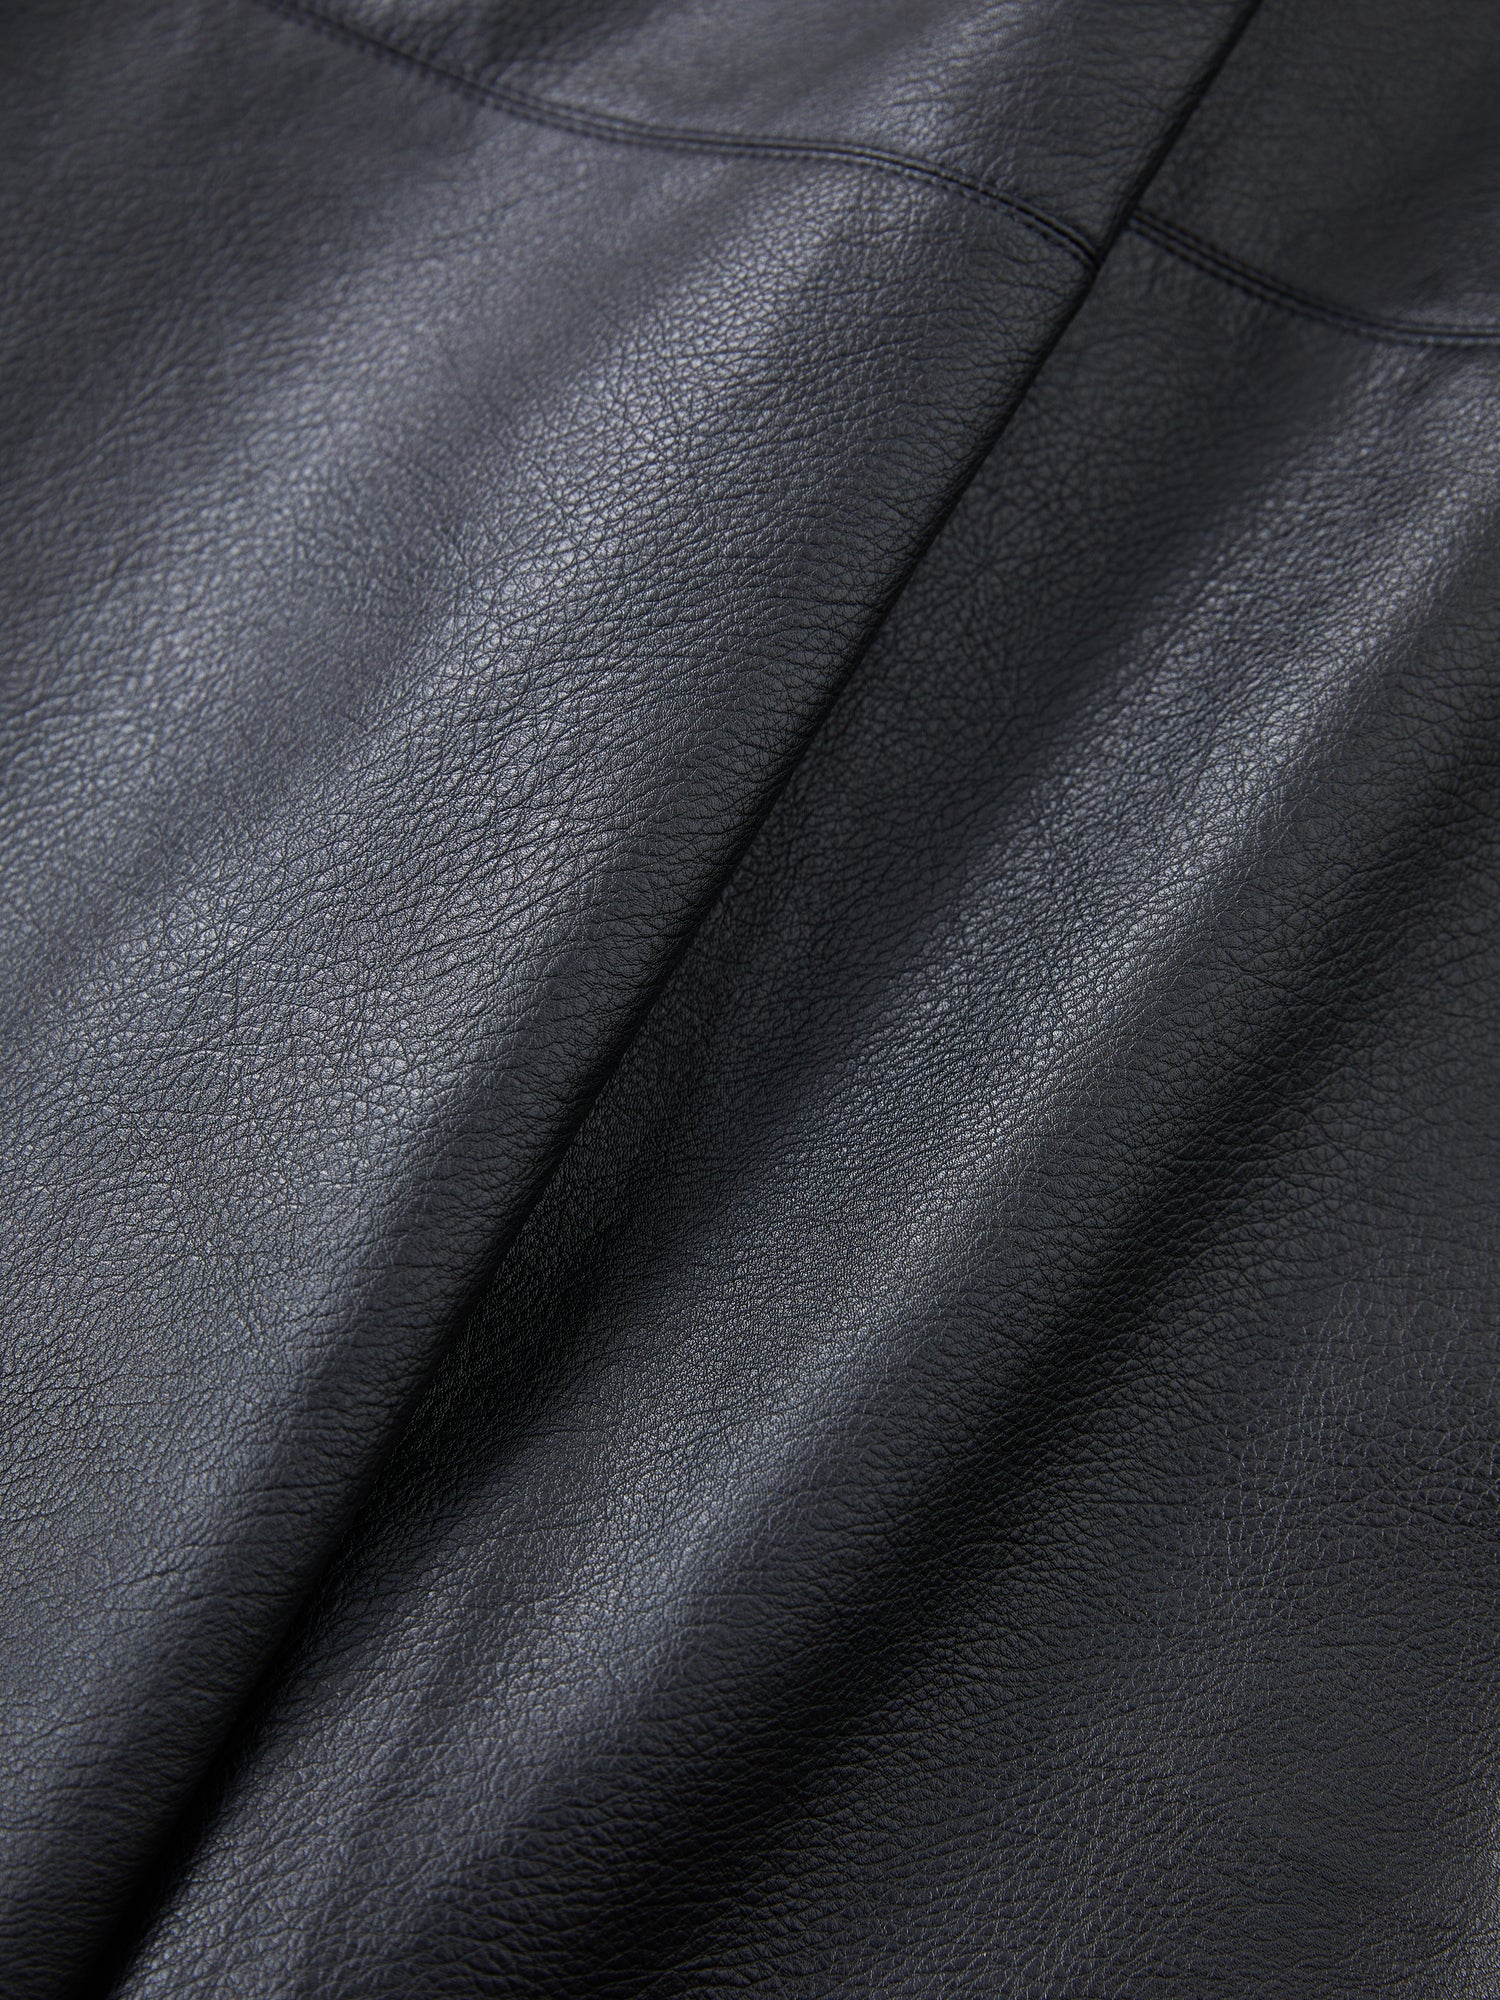 A close up view of a Found Faux Leather Cargo Pants.